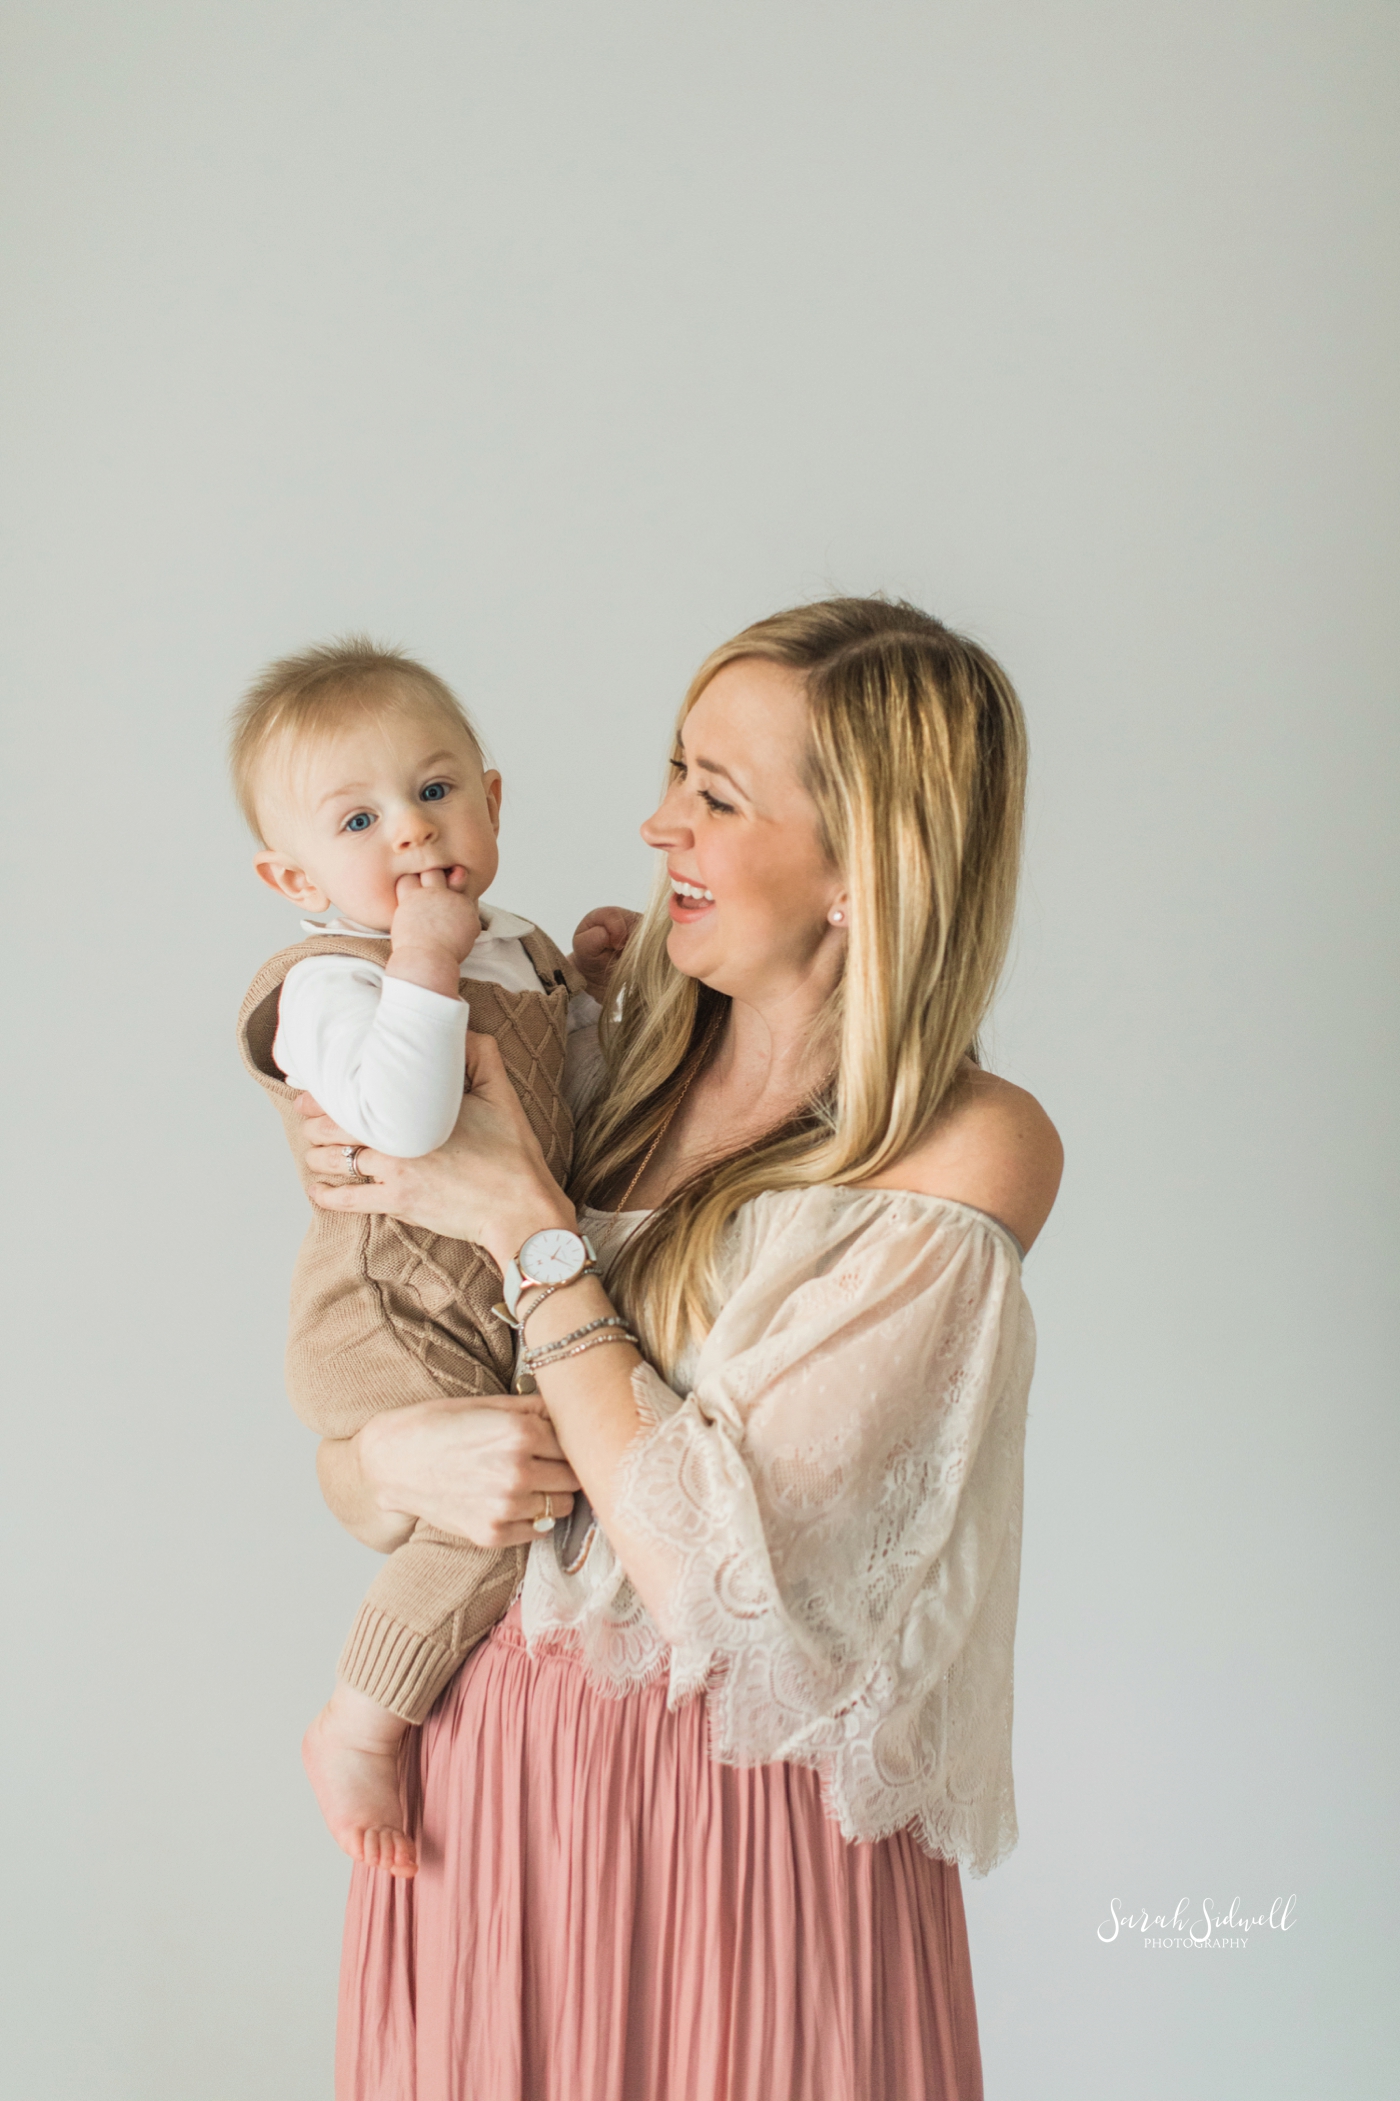 A mother holds her baby while celebrating his half birthday. | Sarah Sidwell Photography